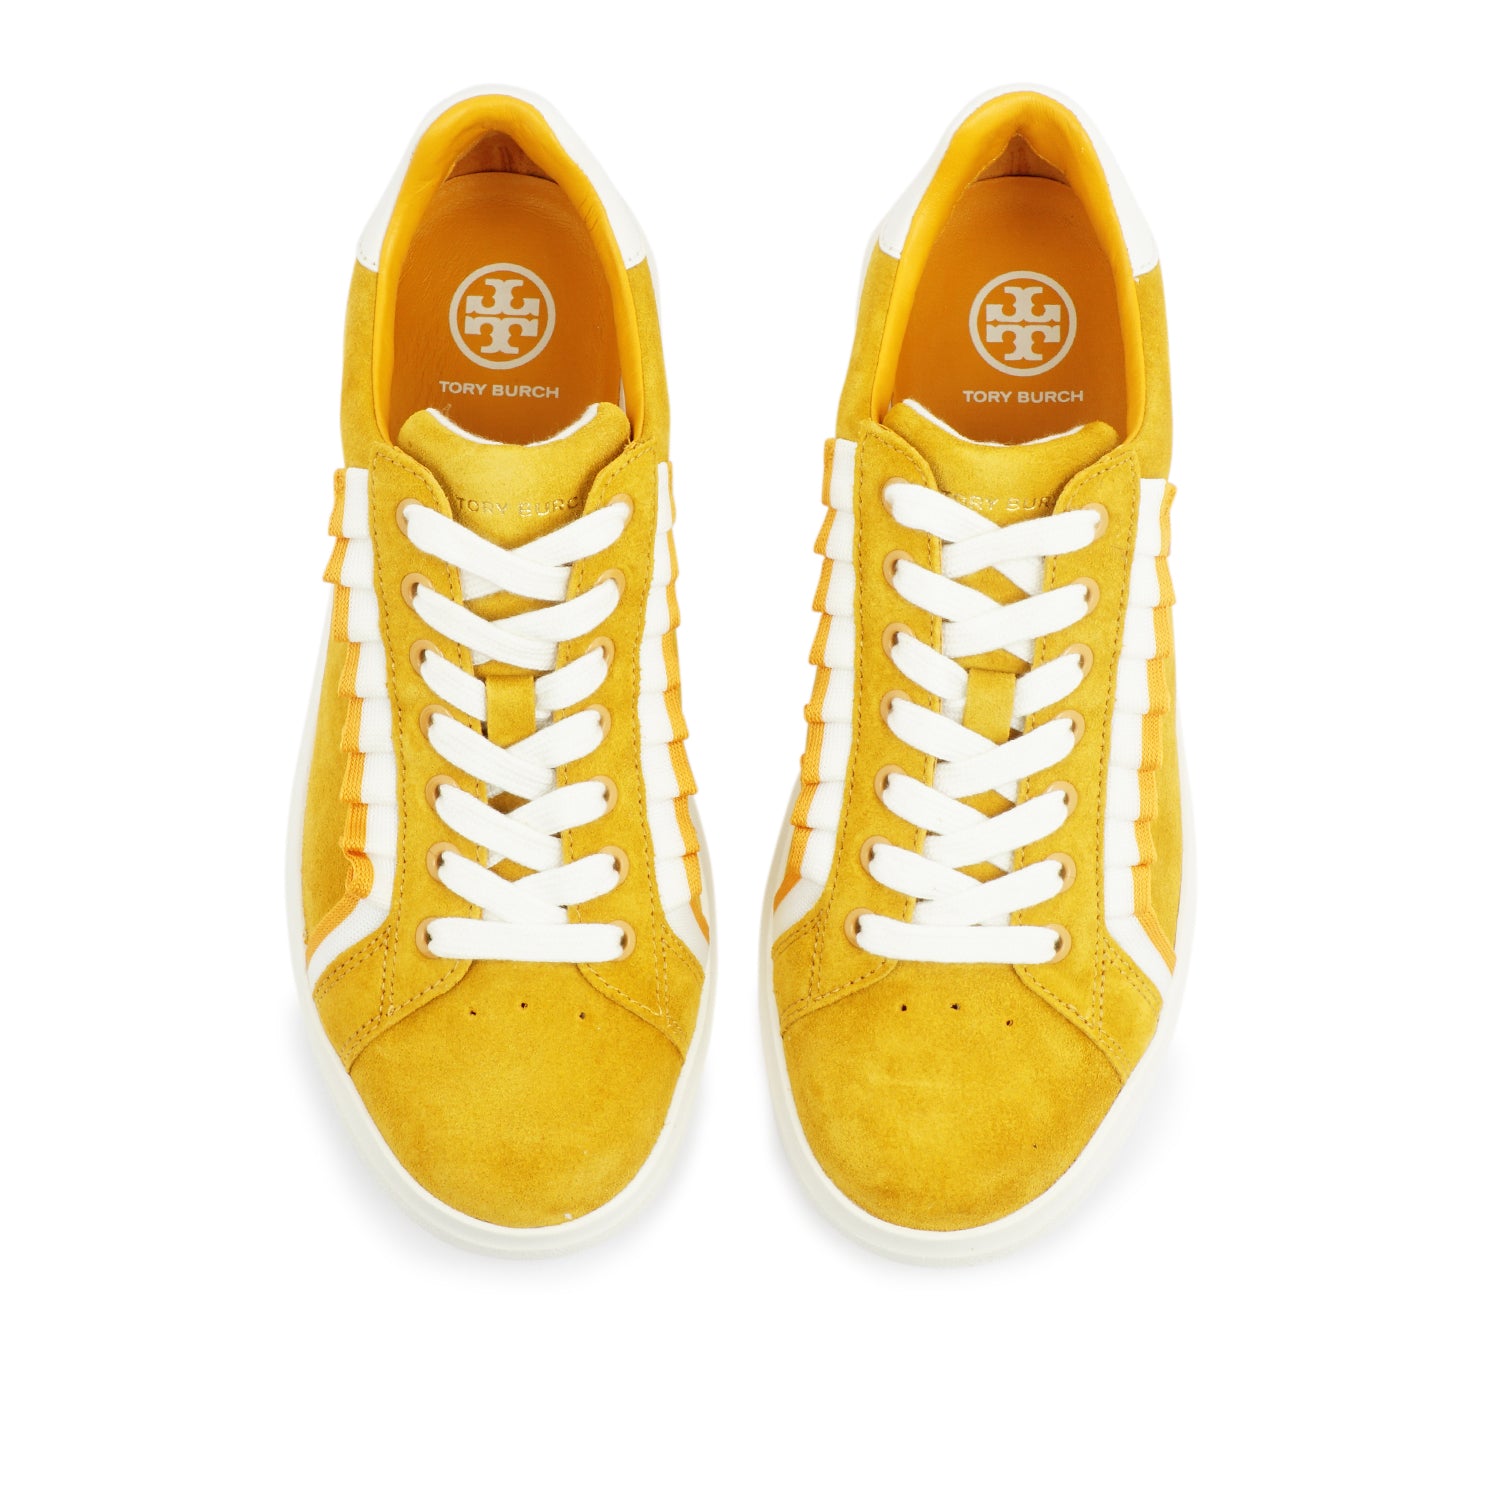 TORY BURCH HOWELL RUFFLE COURT IN YELLOW – Galleria di Lux